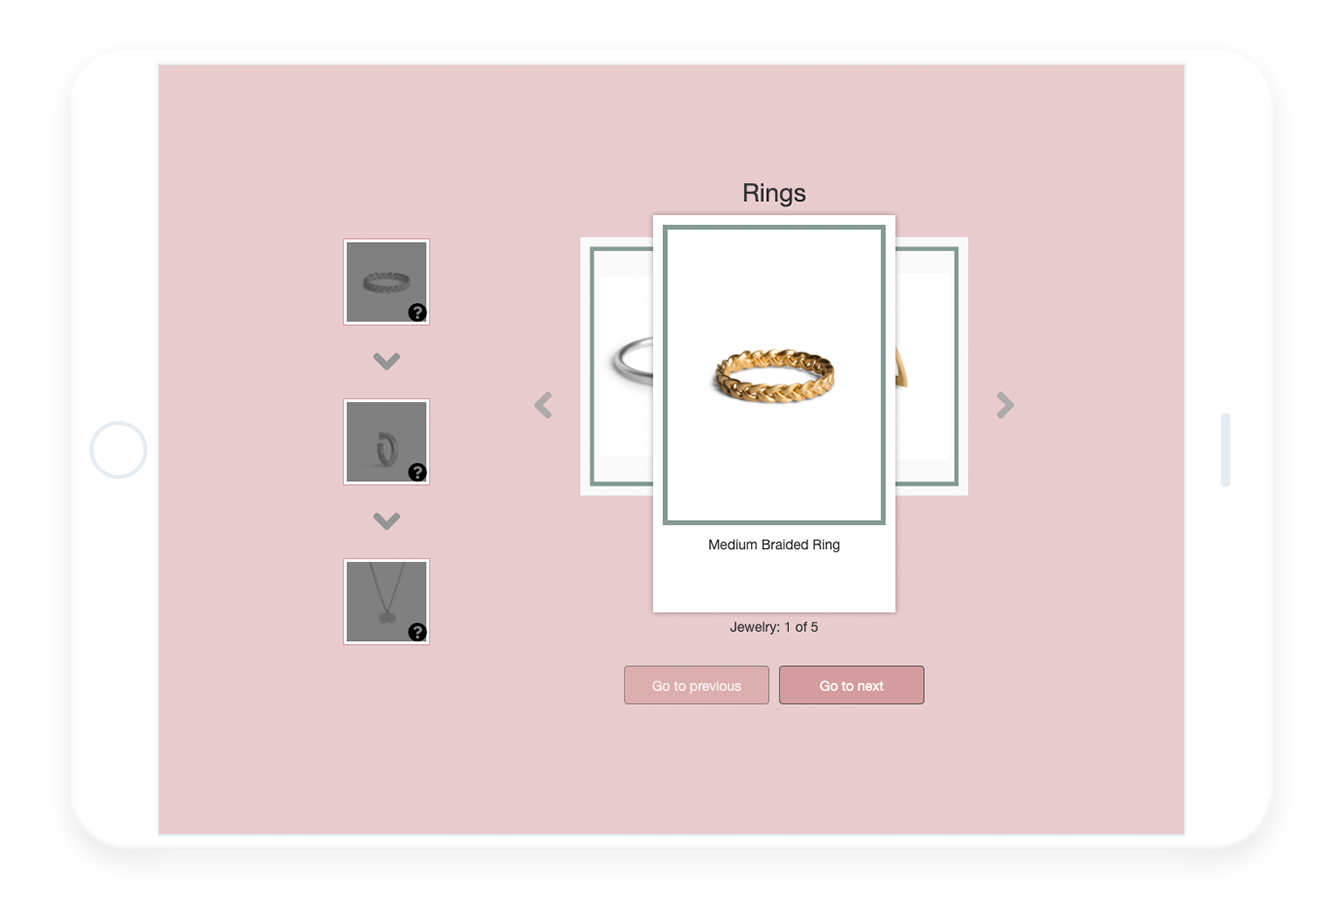 Different jewelry appears on the image, in a product swipe mode. Campaign made for Aveny